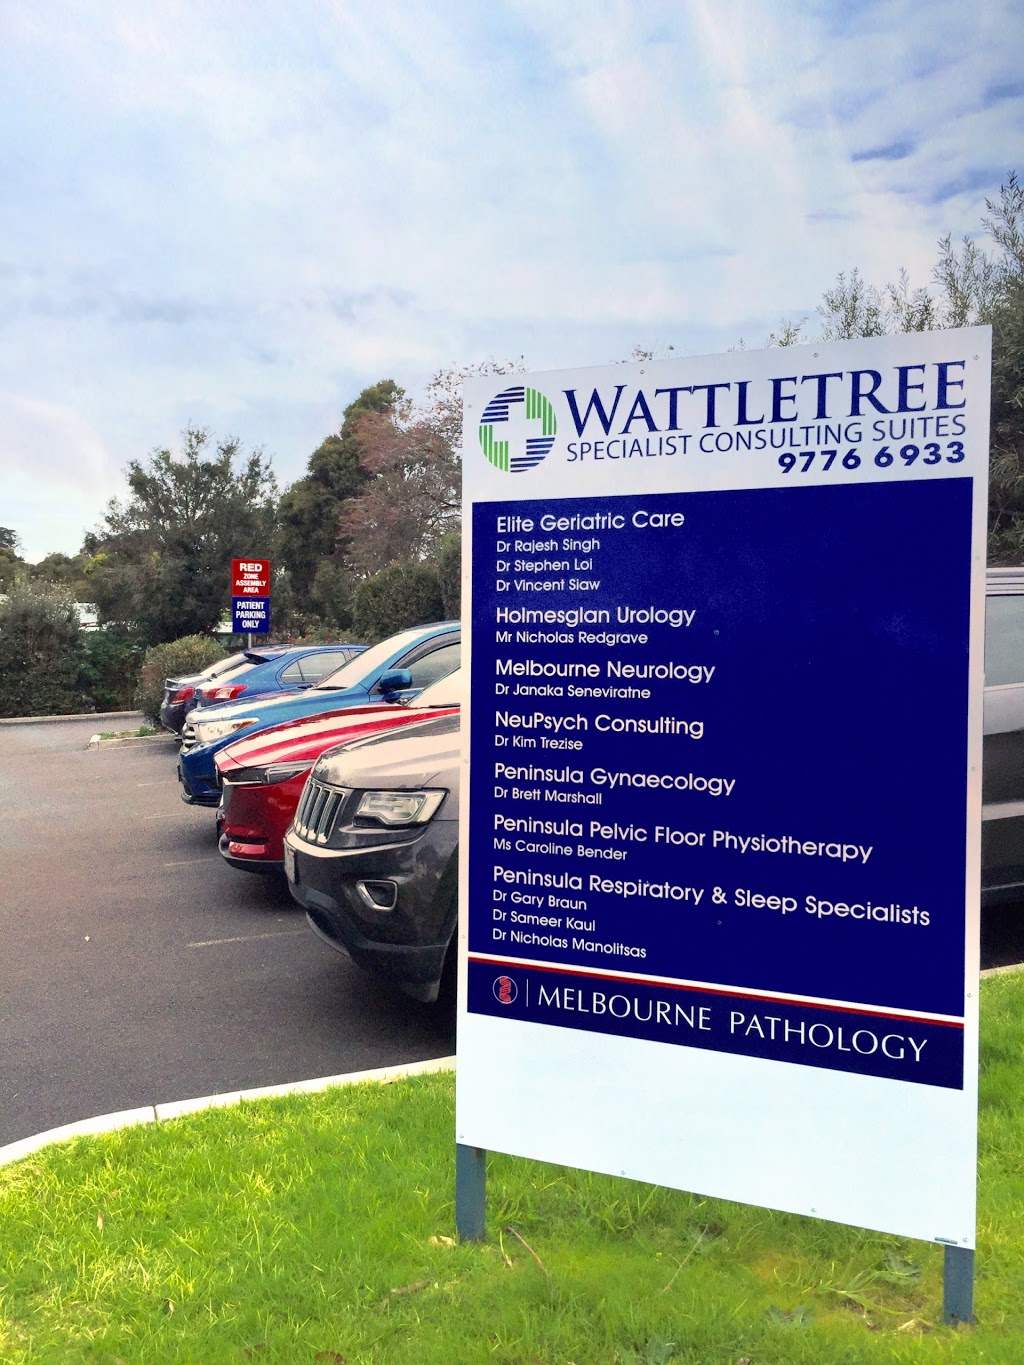 Wattletree Specialist Consulting Suites | hospital | 267 Cranbourne Rd, Frankston VIC 3199, Australia | 0397766933 OR +61 3 9776 6933